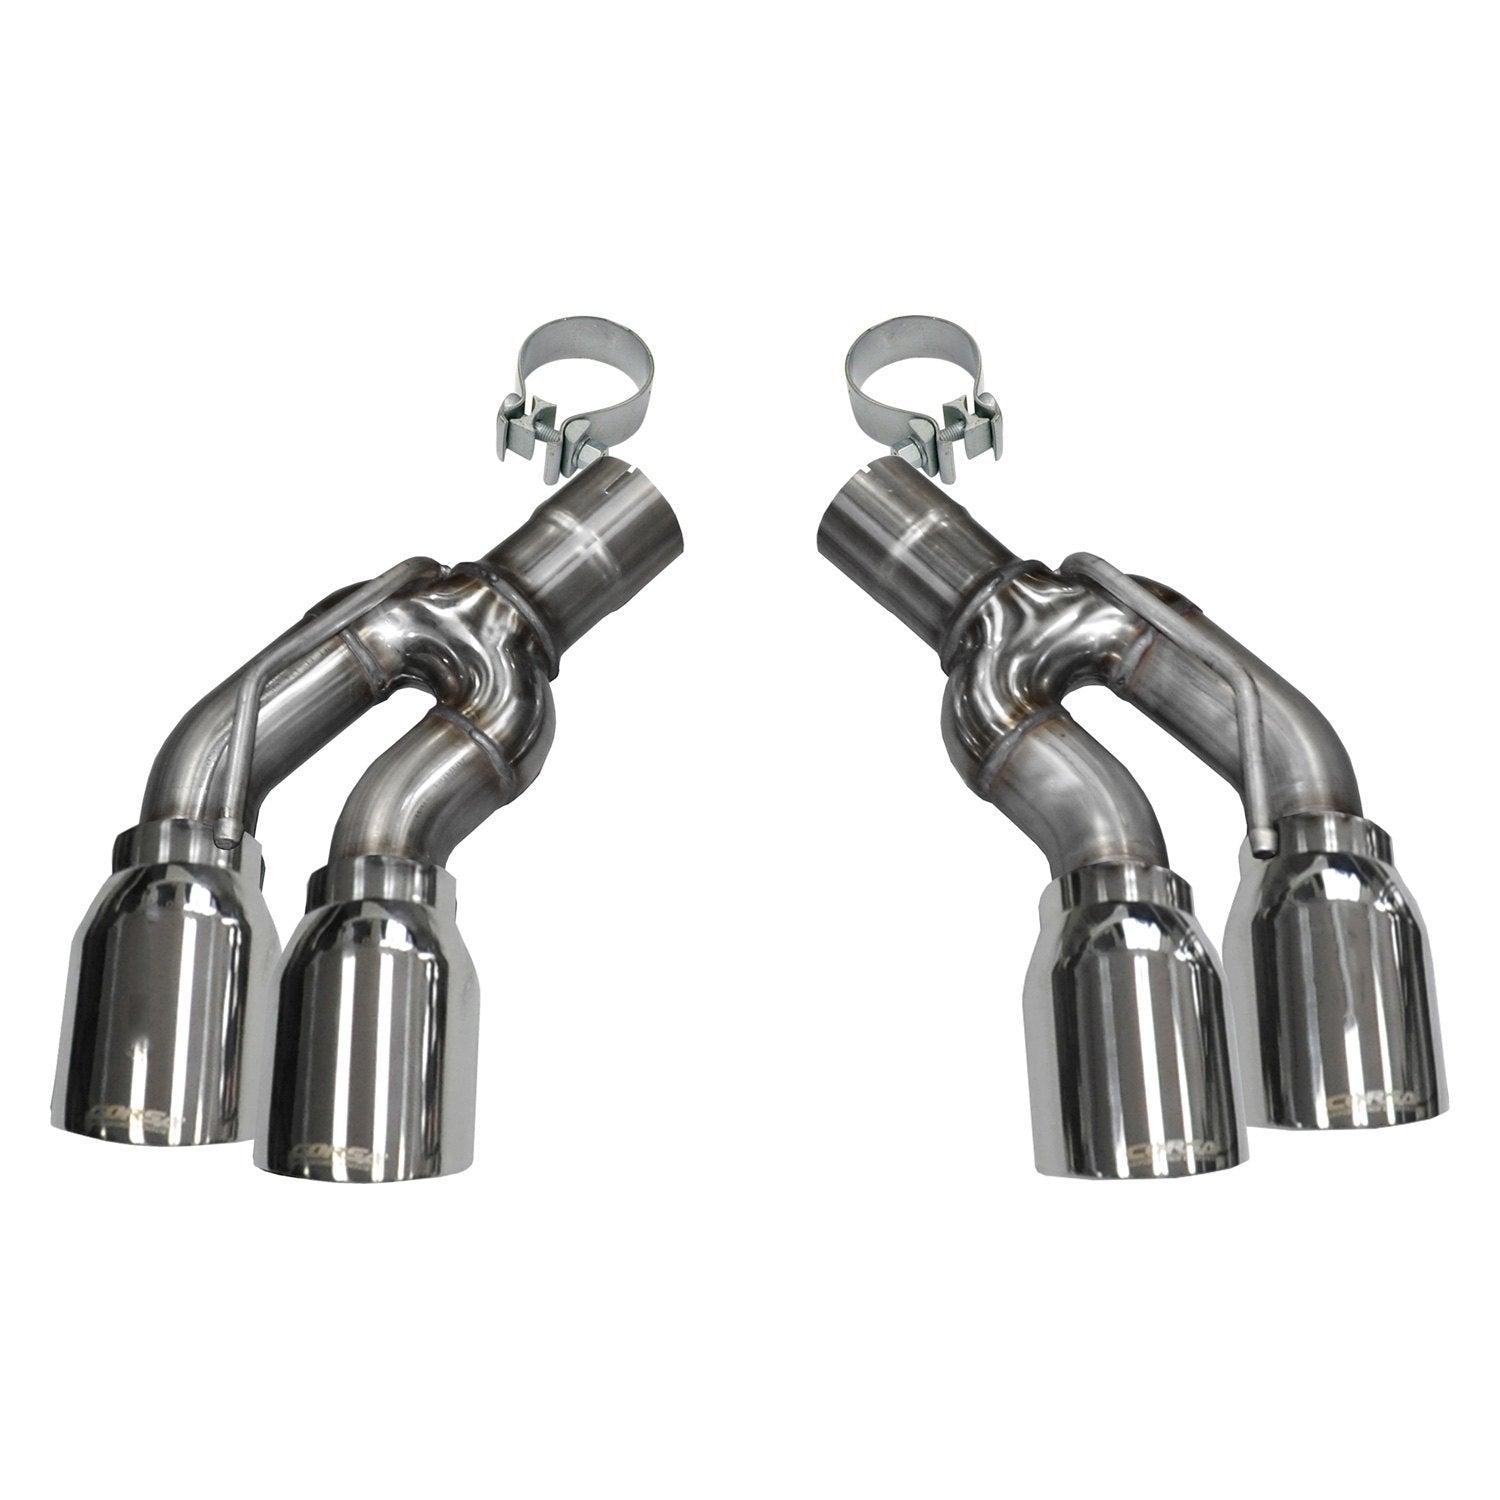 Corsa 304 SS Round Angle Cut Dual Polished Exhaust Tips For Cadillac 16-19 14359